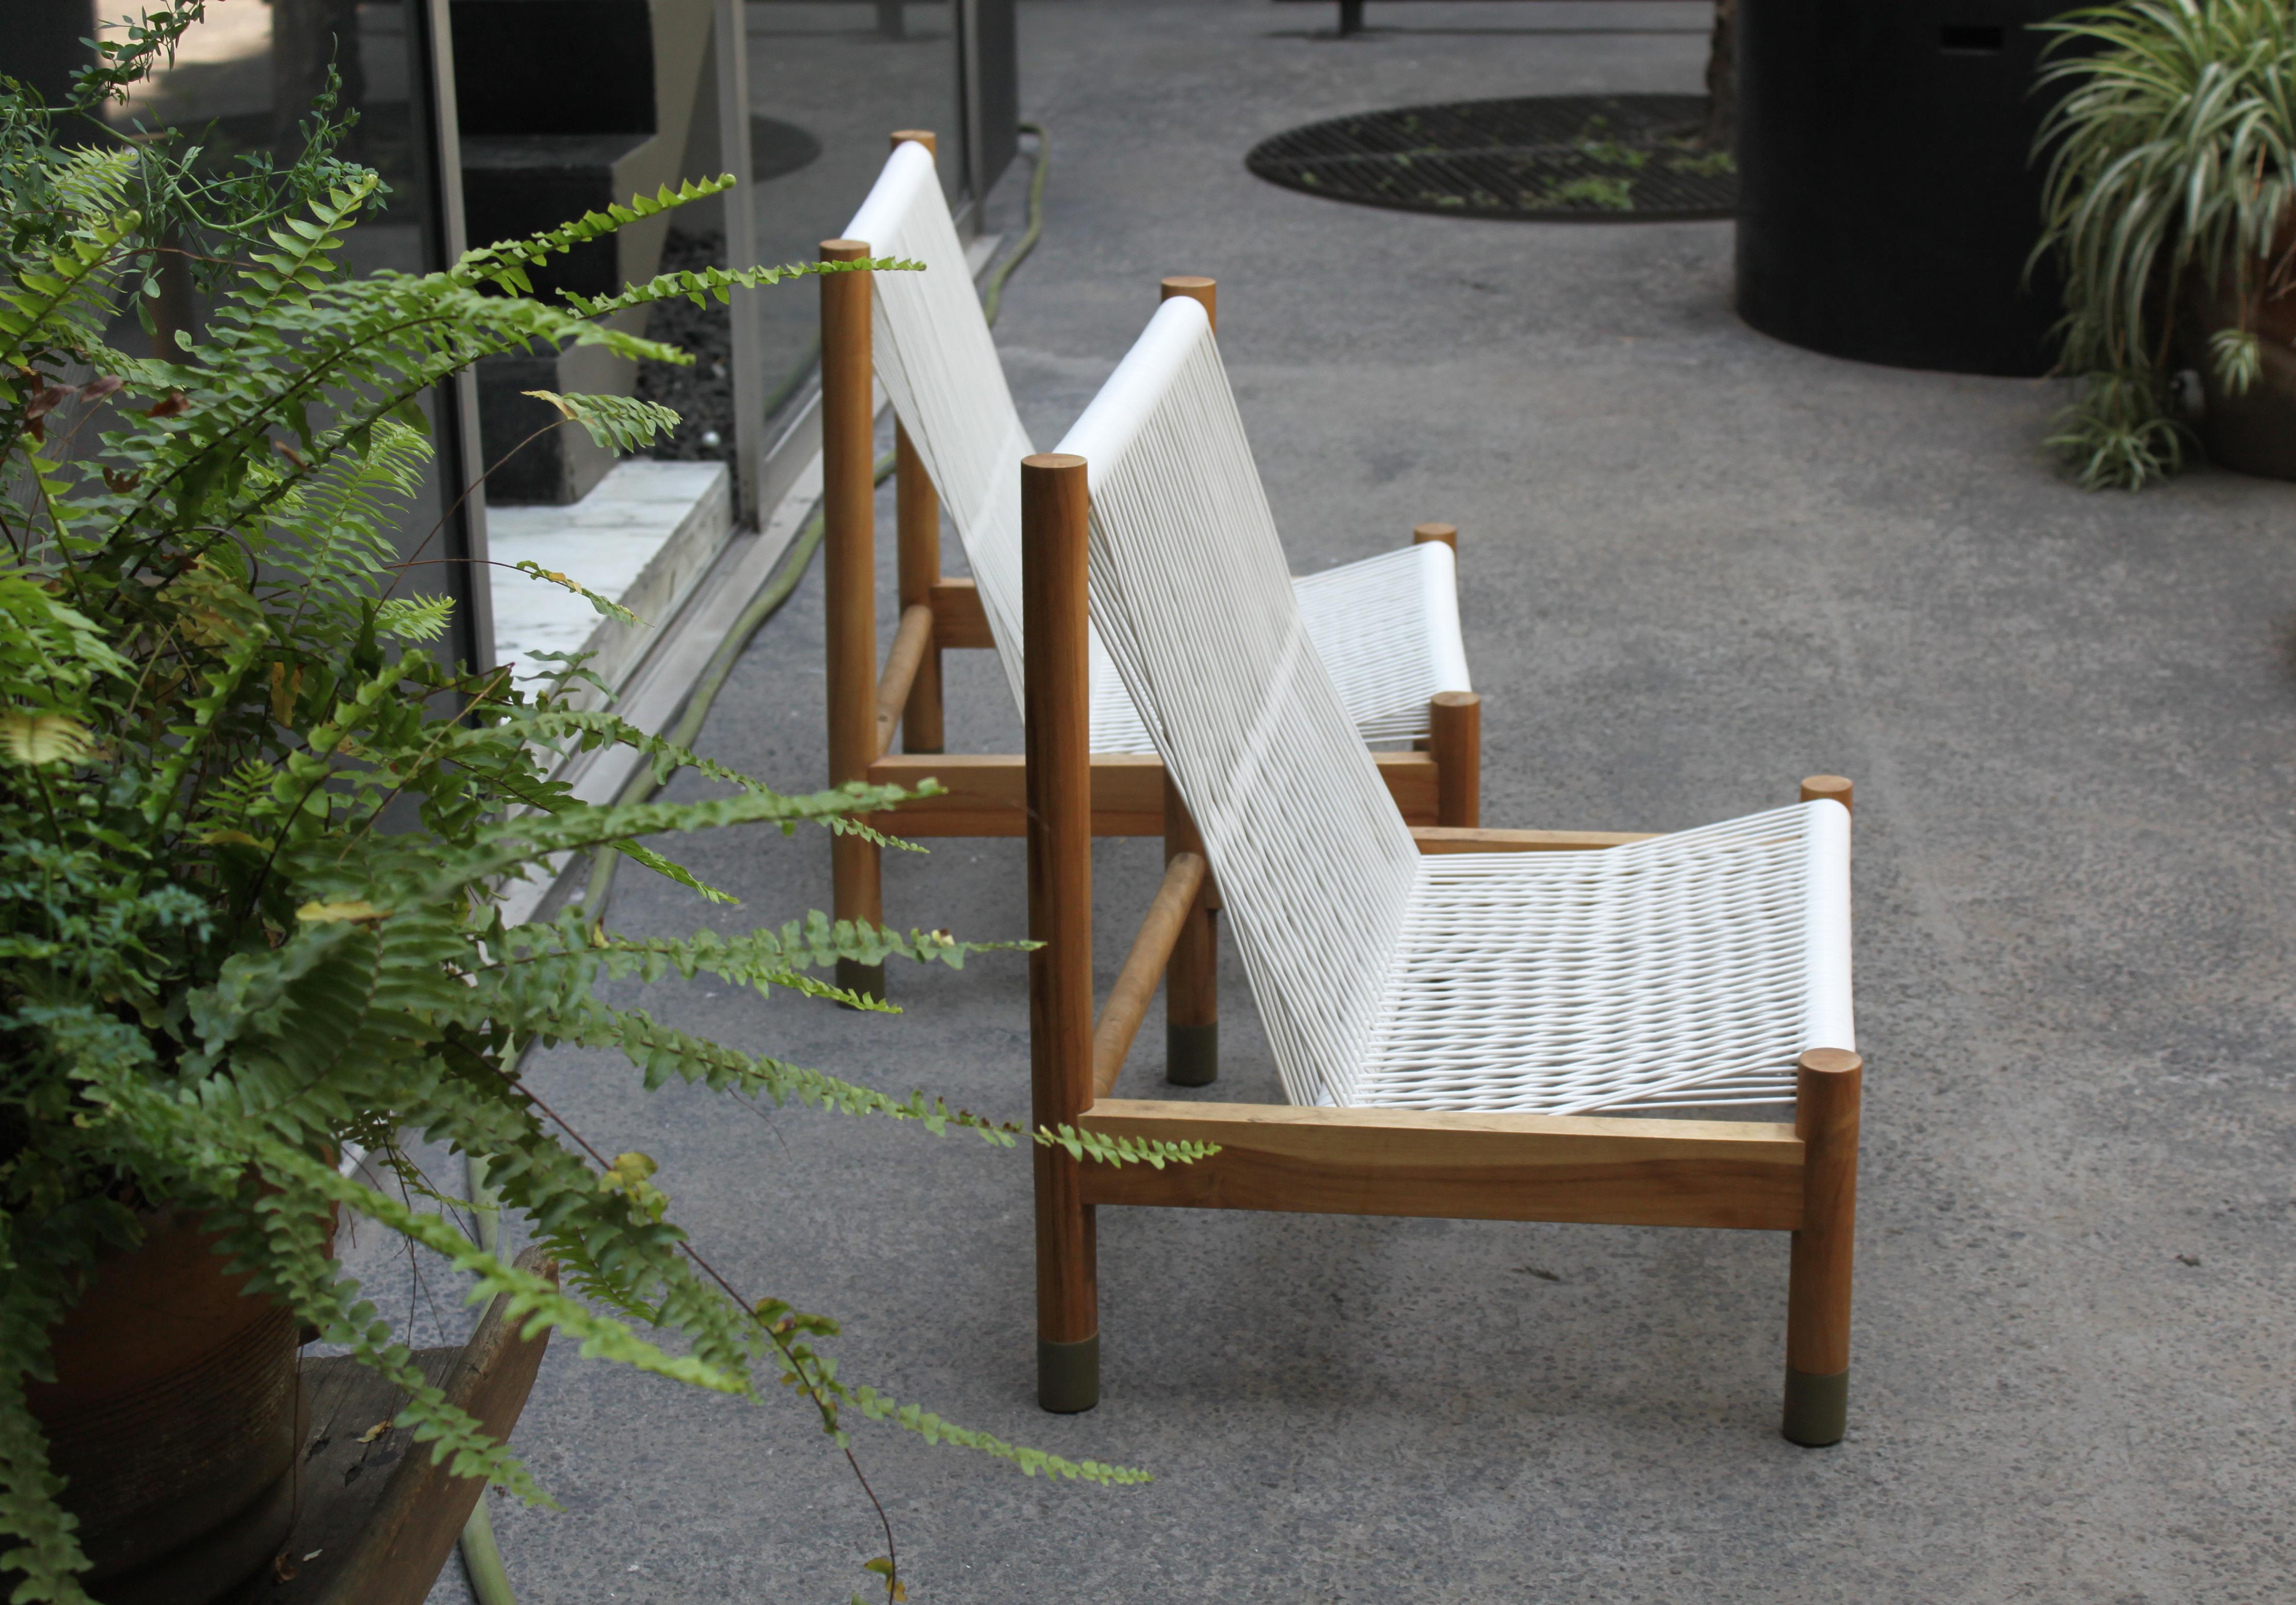 Mexican Al Sol Outdoor Chair, Maria Beckmann, Represented by Tuleste Factory